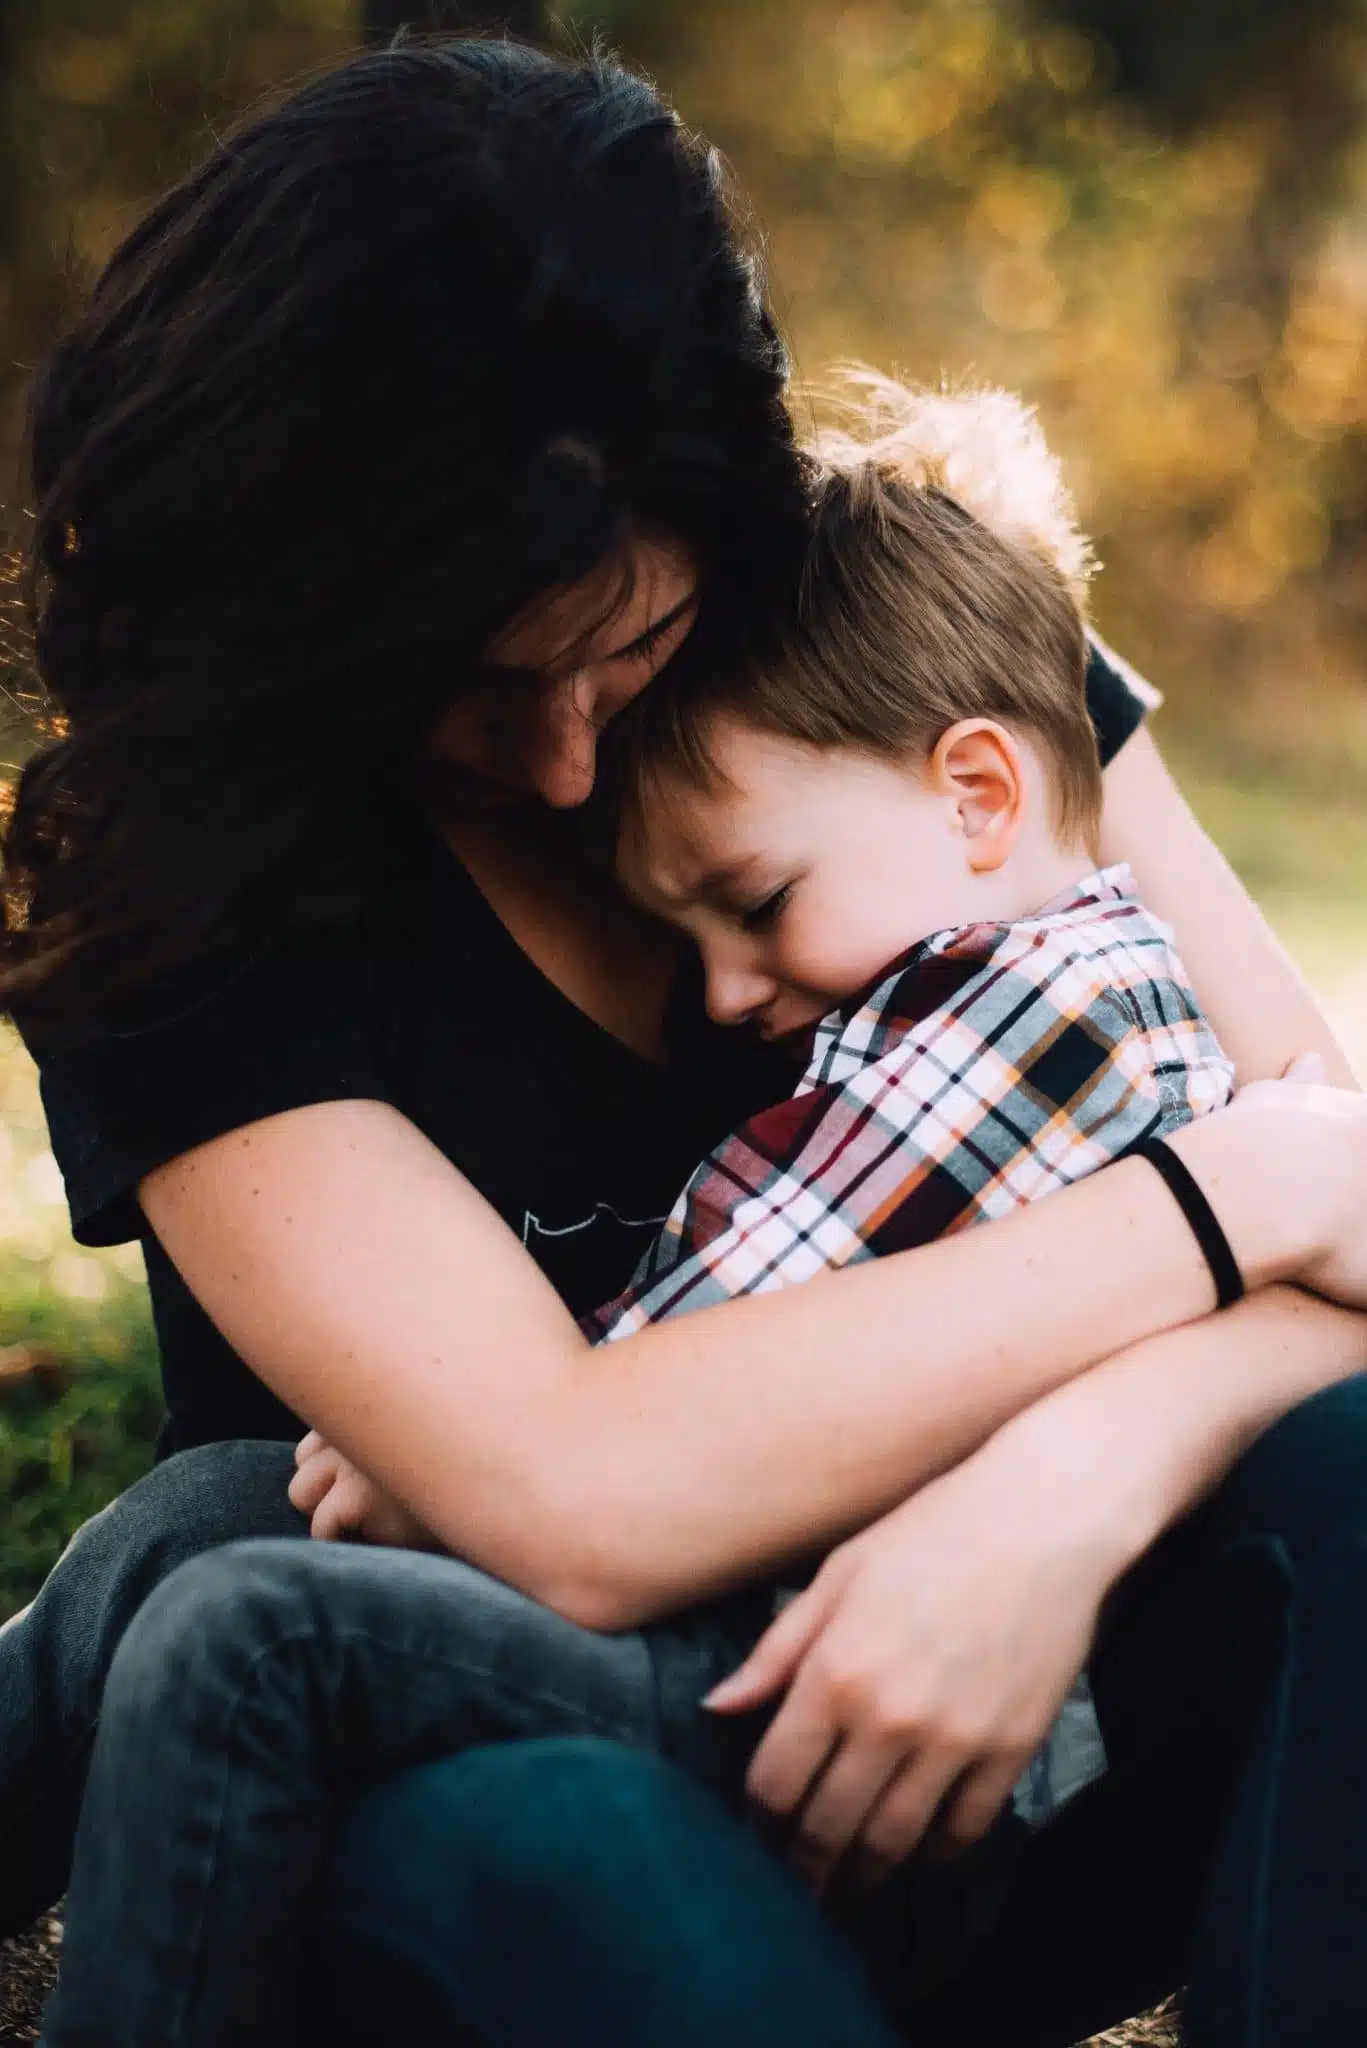 A mom comforts her upset child, as parents just want to protect their kids. 